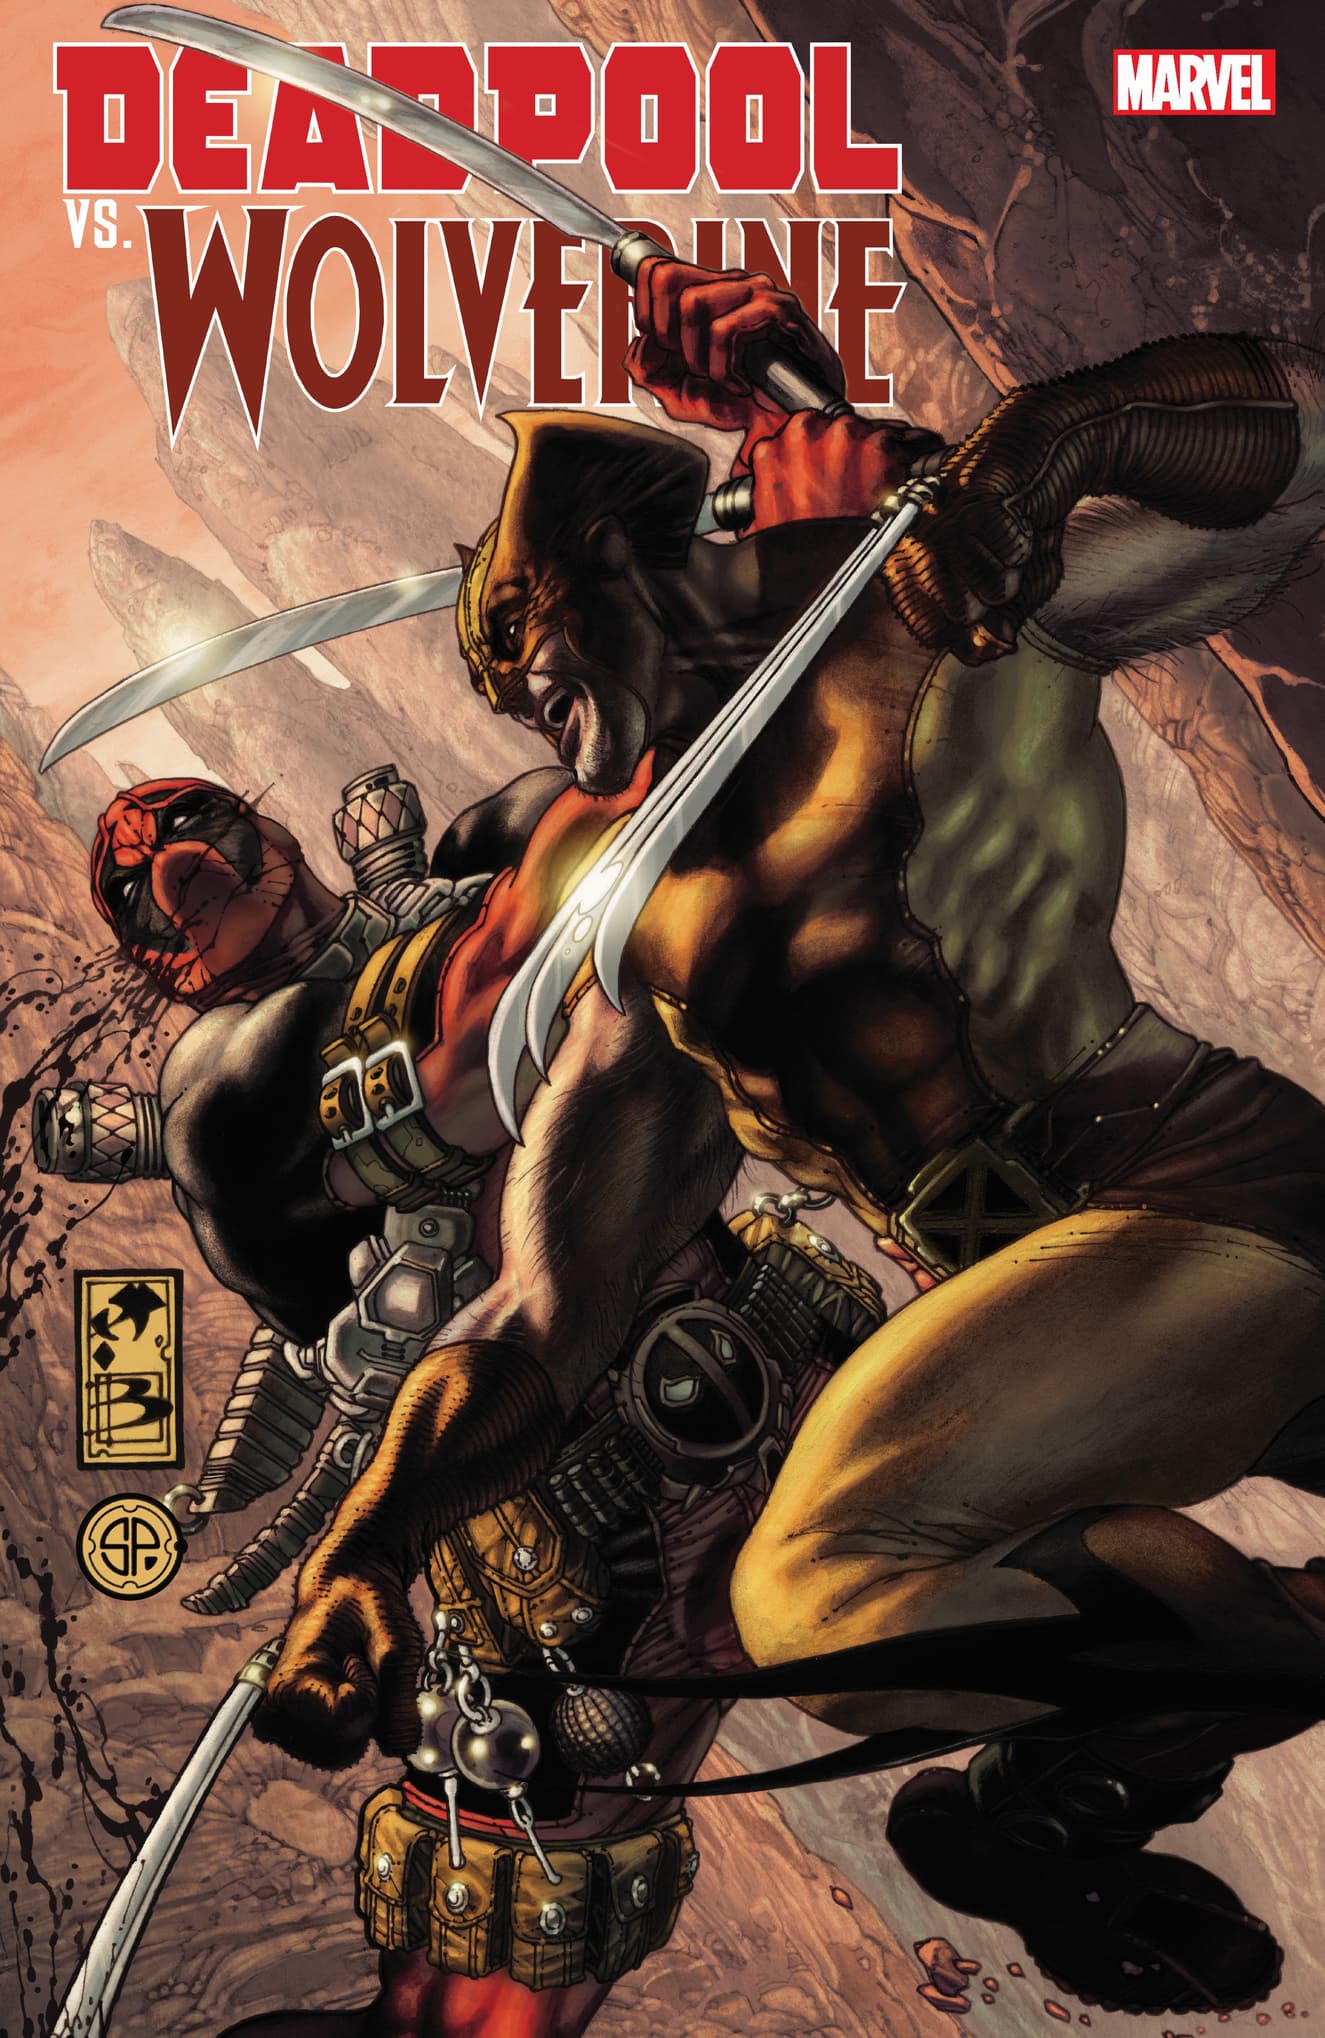 DEADPOOL VS. WOLVERINE cover by Simone Bianchi